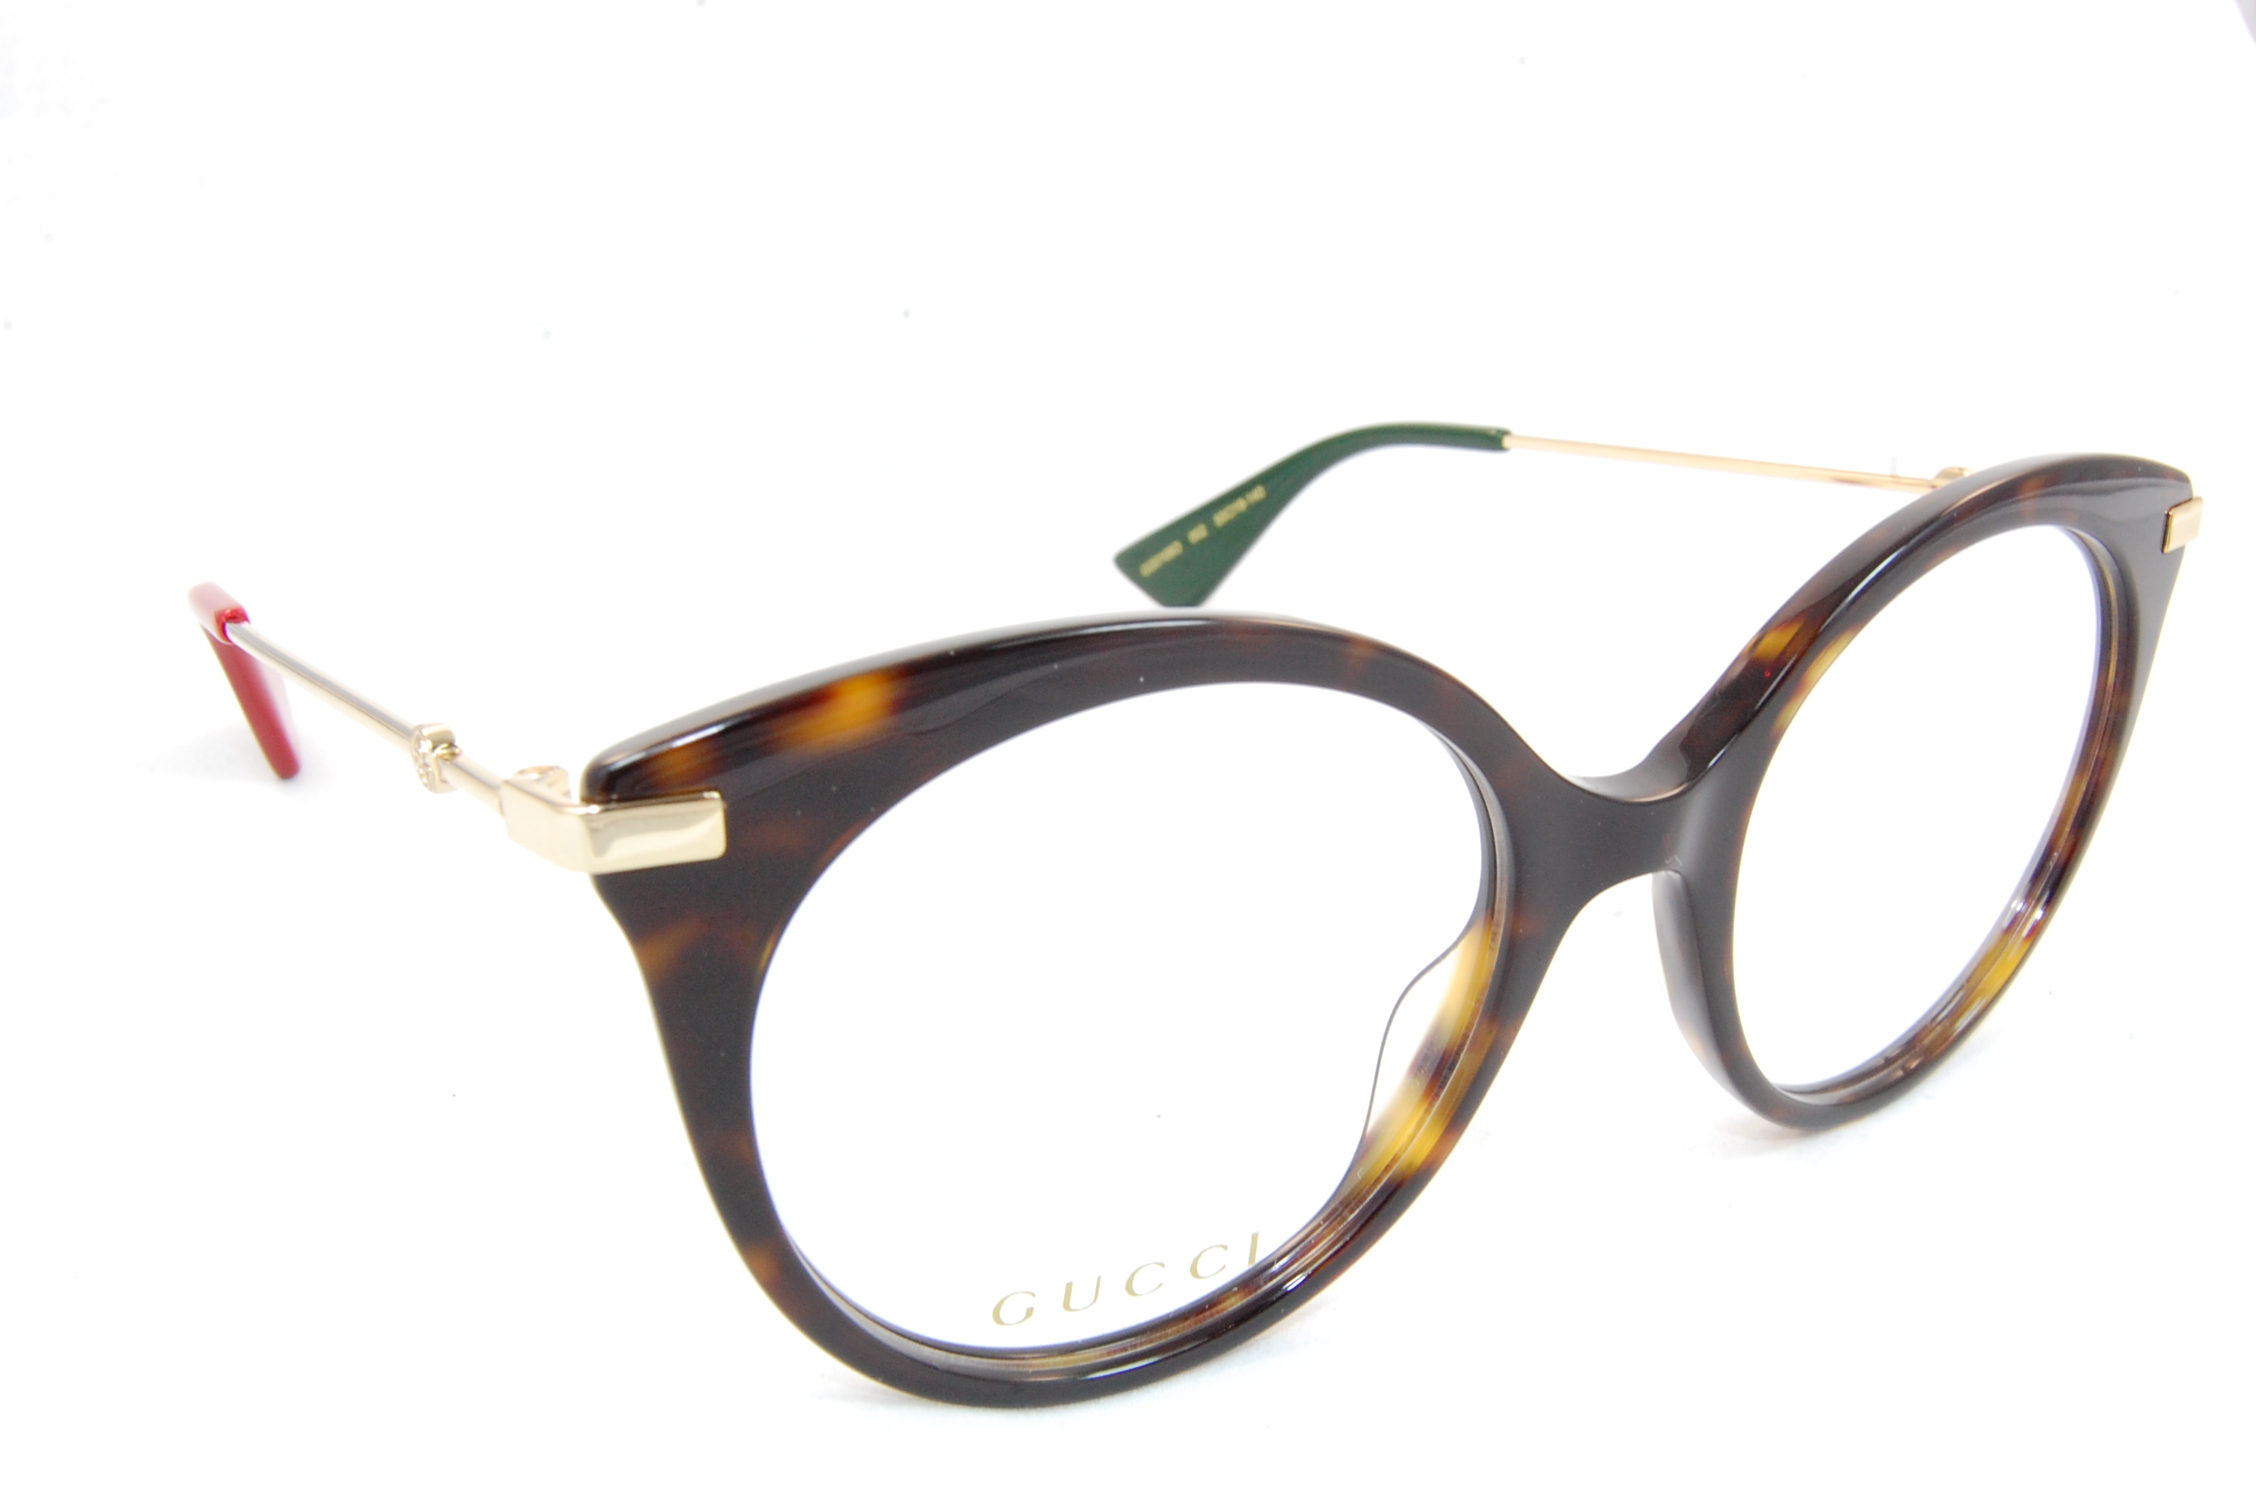 GUCCI OPTIQUE 10/10 FACHES THUMESNIL